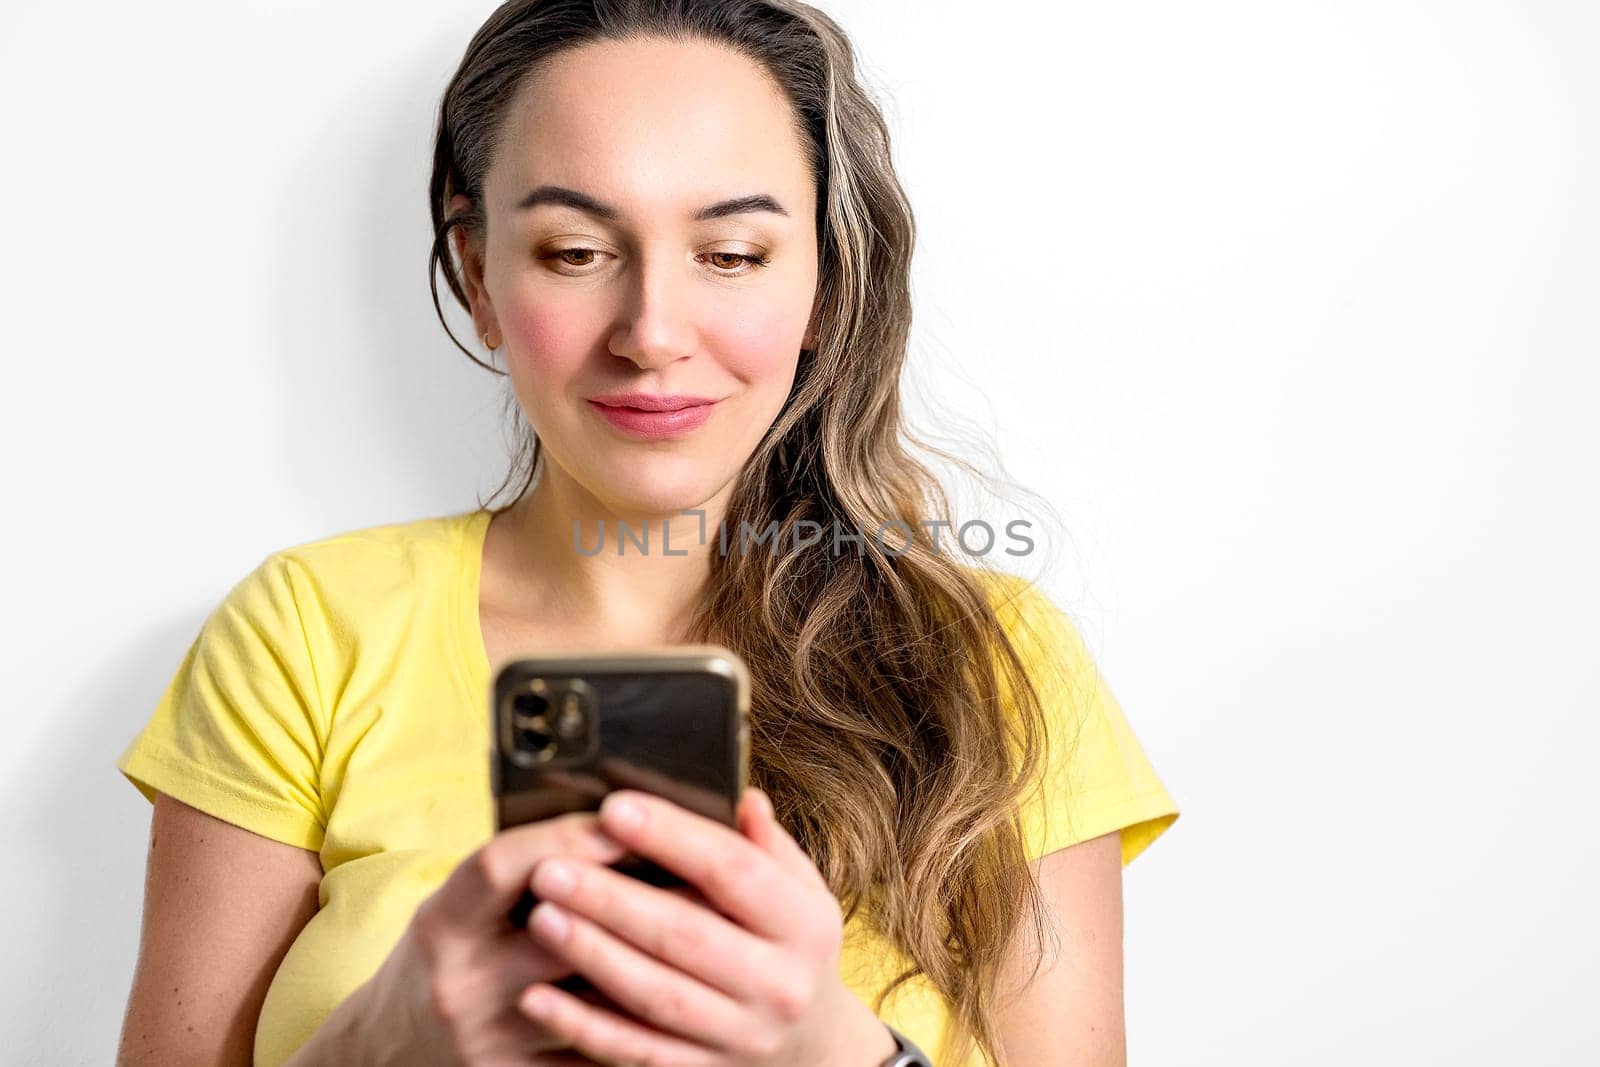 Smiling young woman in blank yellow t-shirt using smartphone on light background. Technology and people concept.